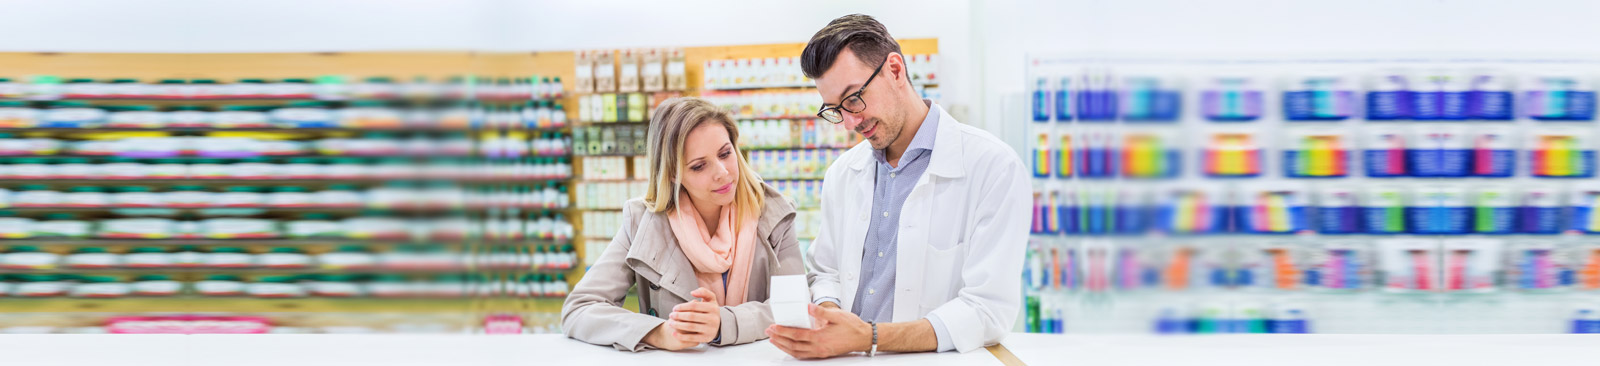 How pharmacists and patients can reduce medication errors